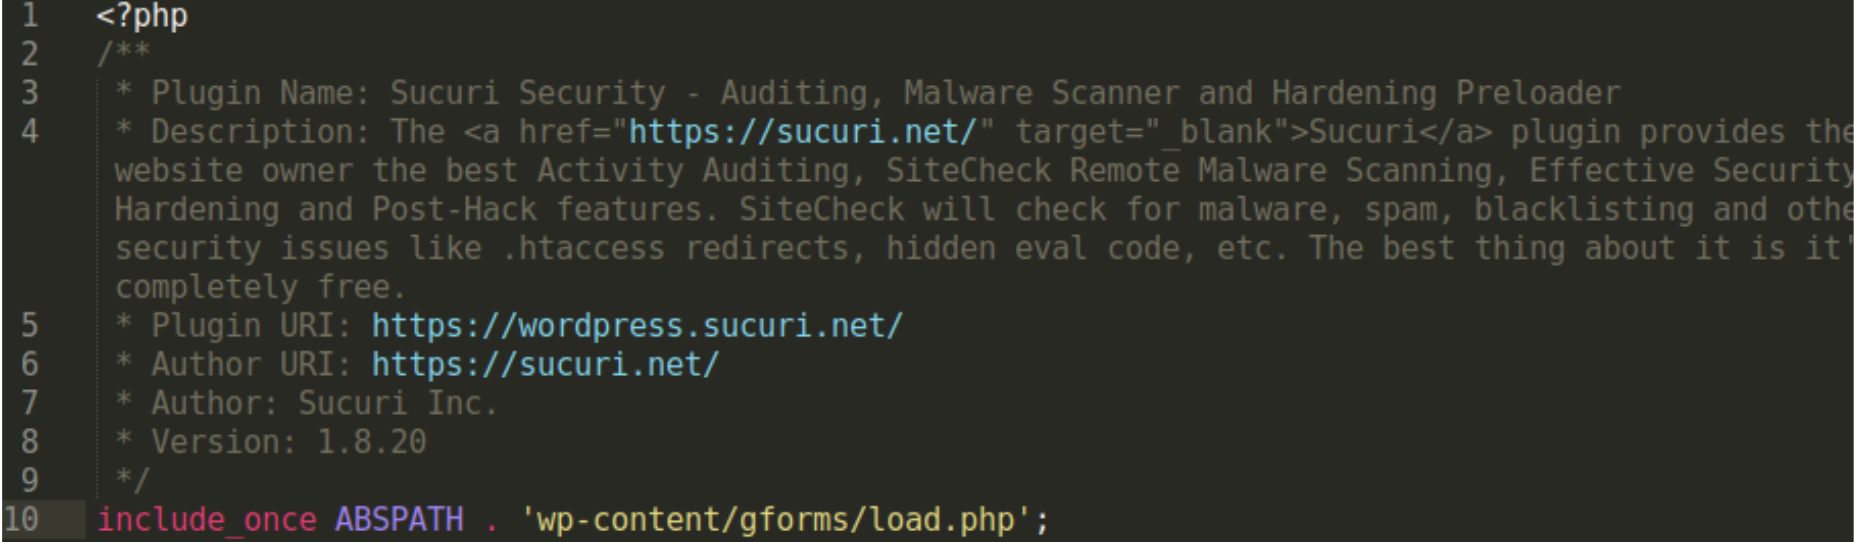 0-sucuri-boot.php: We do not use a file with such a name in our WordPress plugin